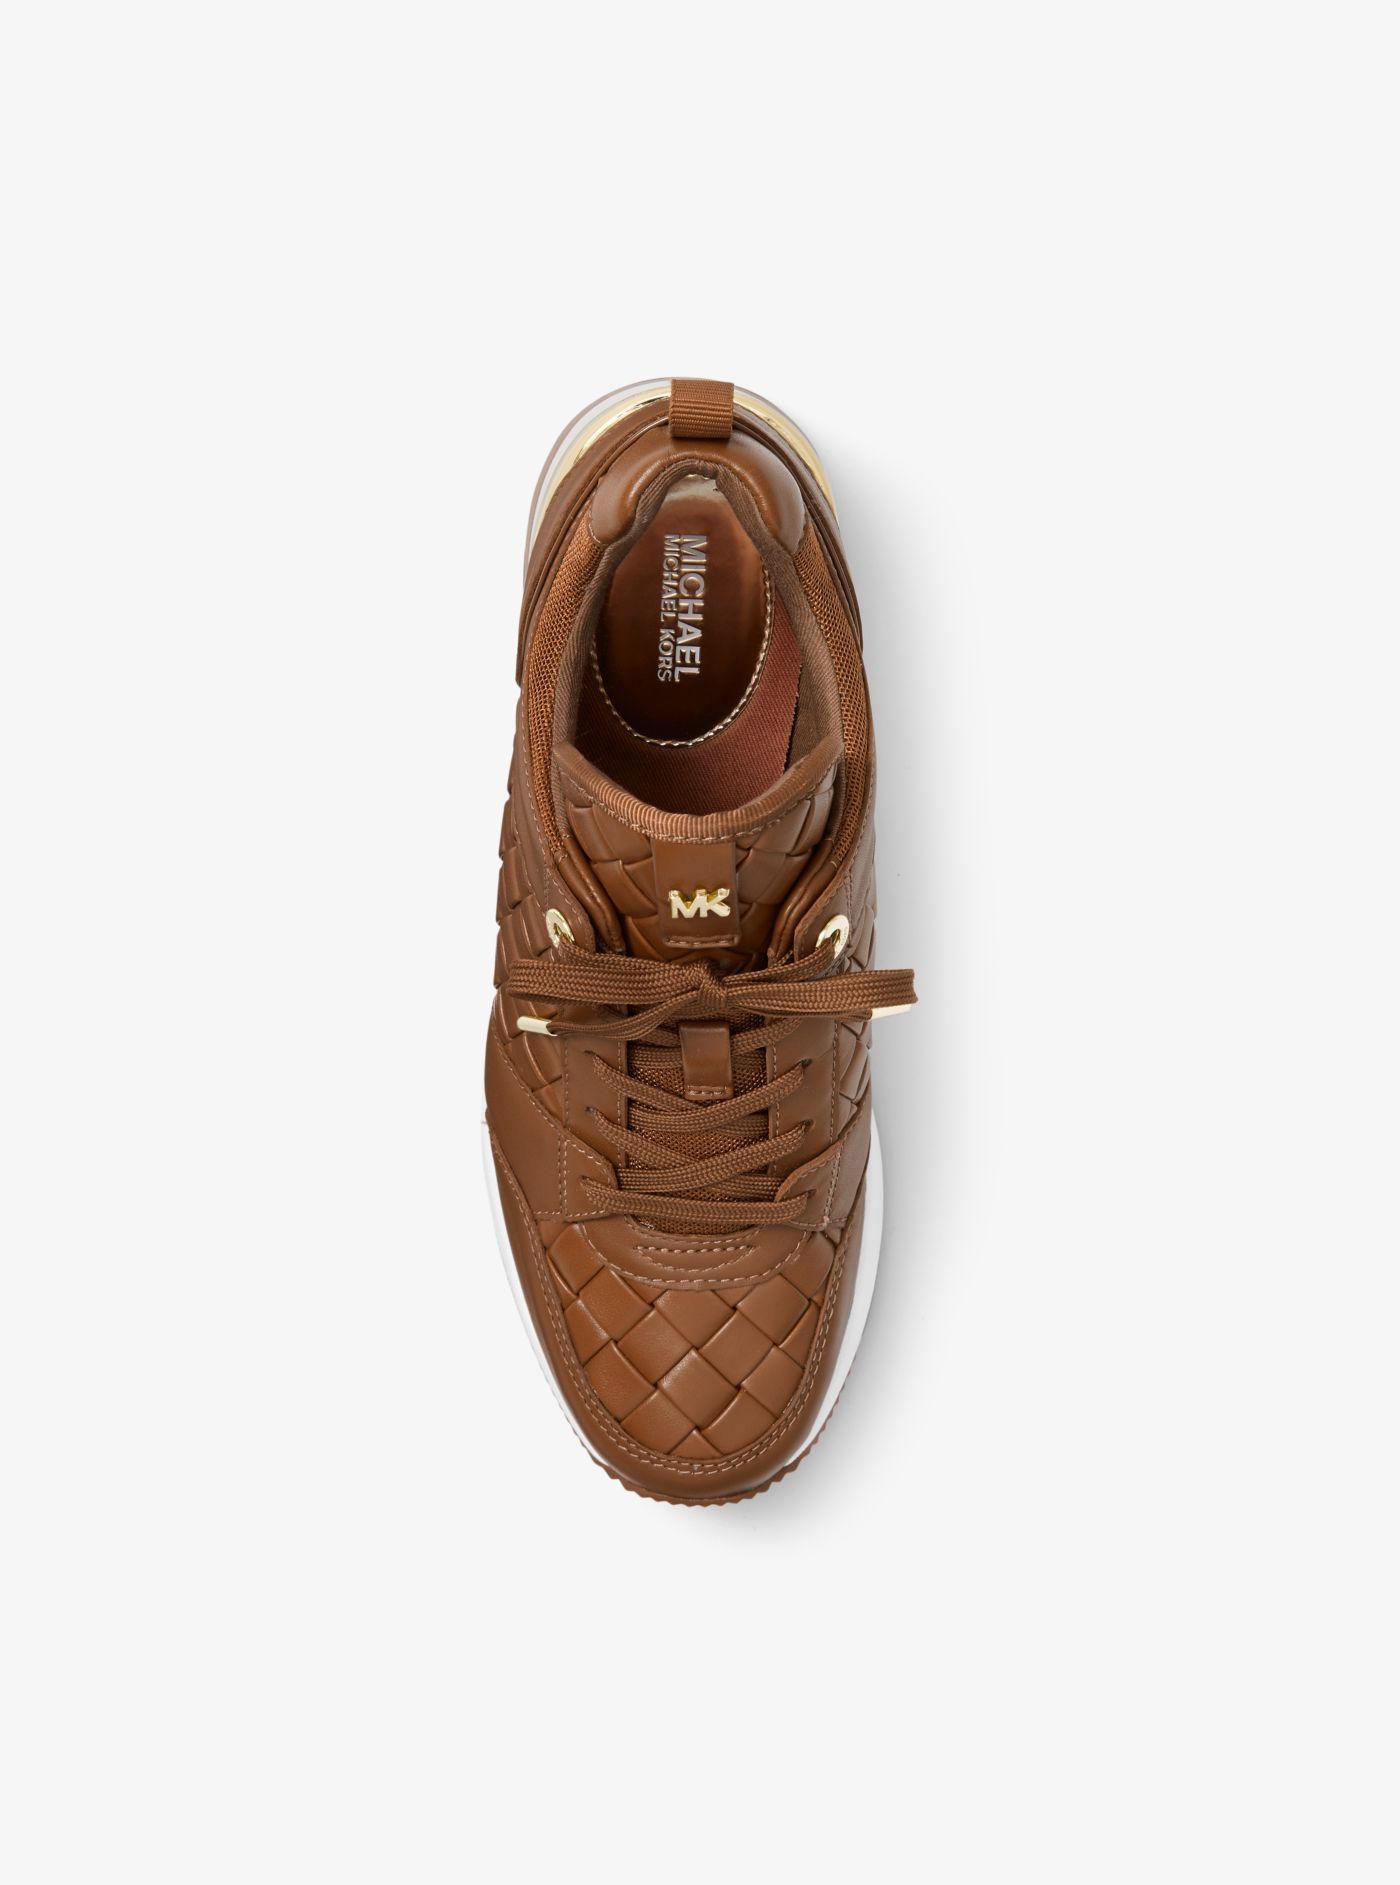 Michael Kors Georgie Woven Leather Trainer in Brown | Lyst